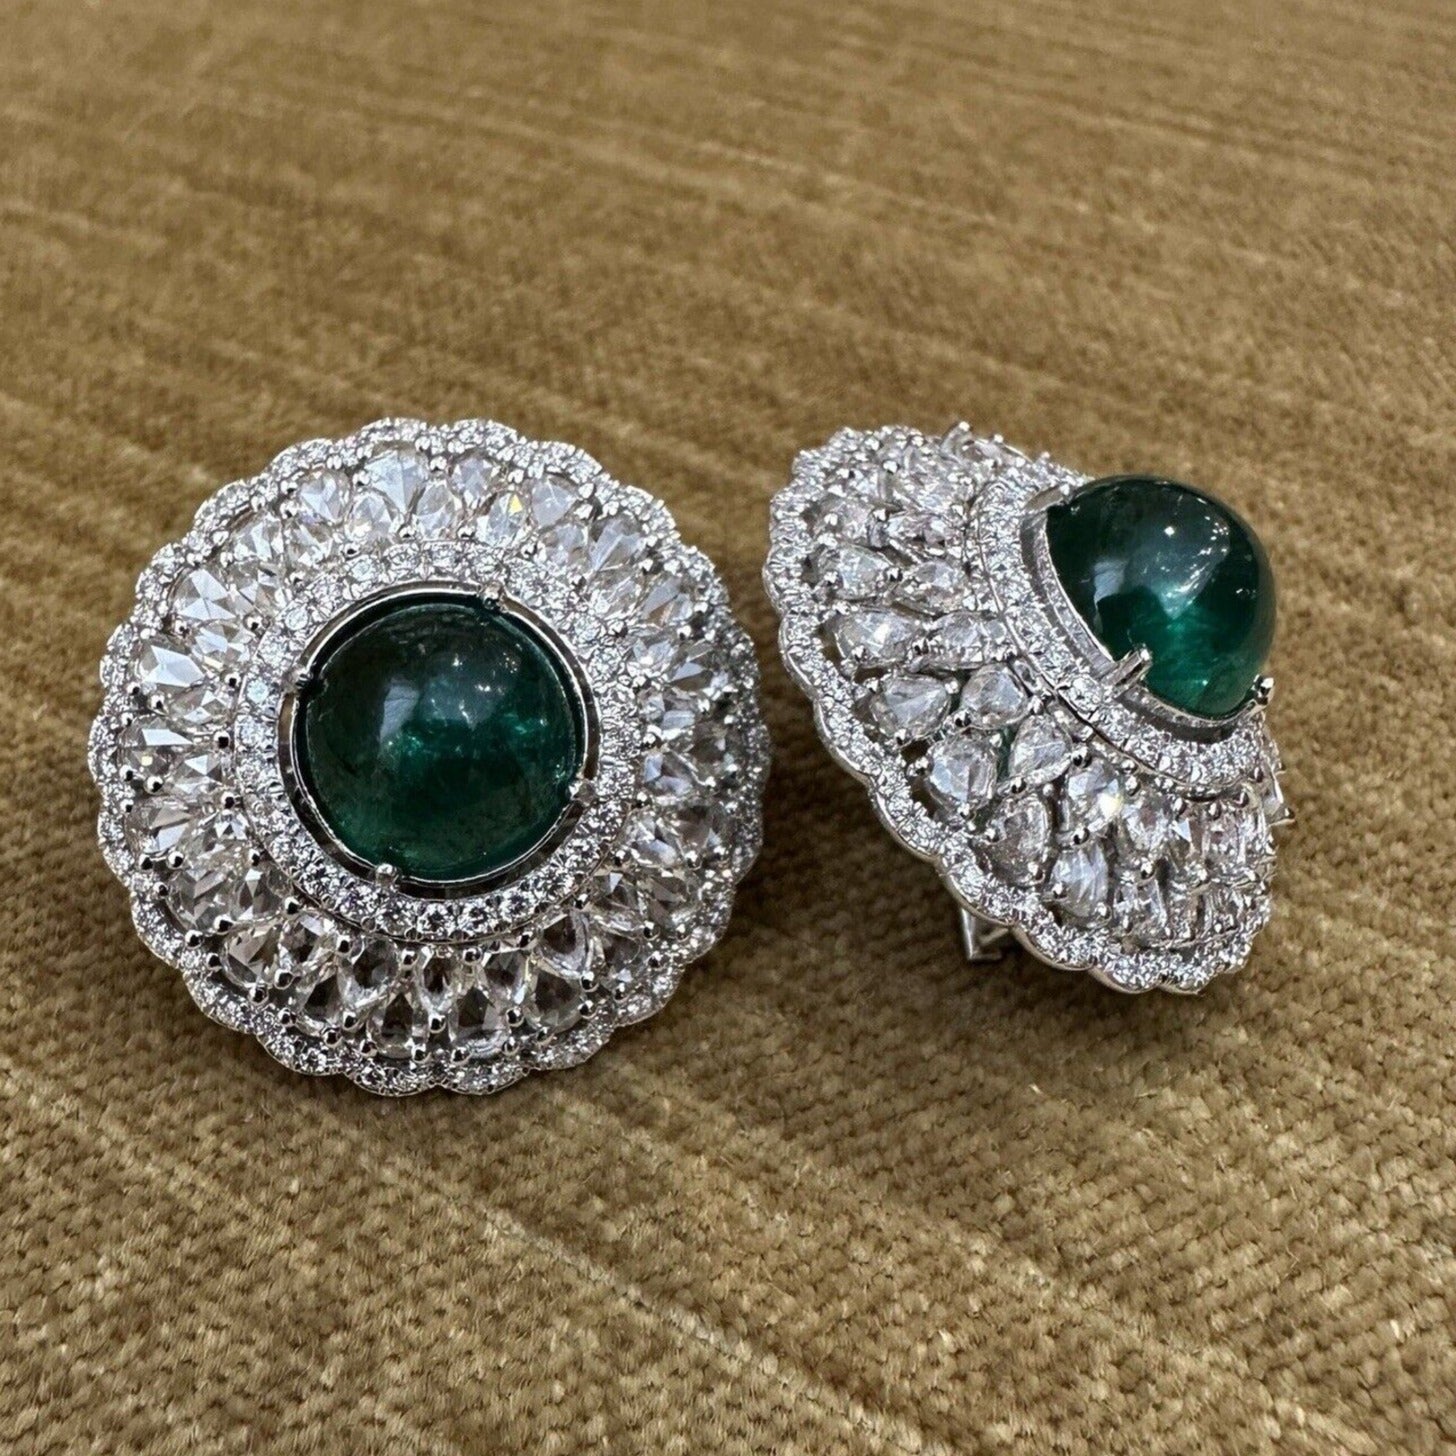 Emerald Cabochon and Rose cut Diamond Earrings in 18k White Gold - HM2569EI